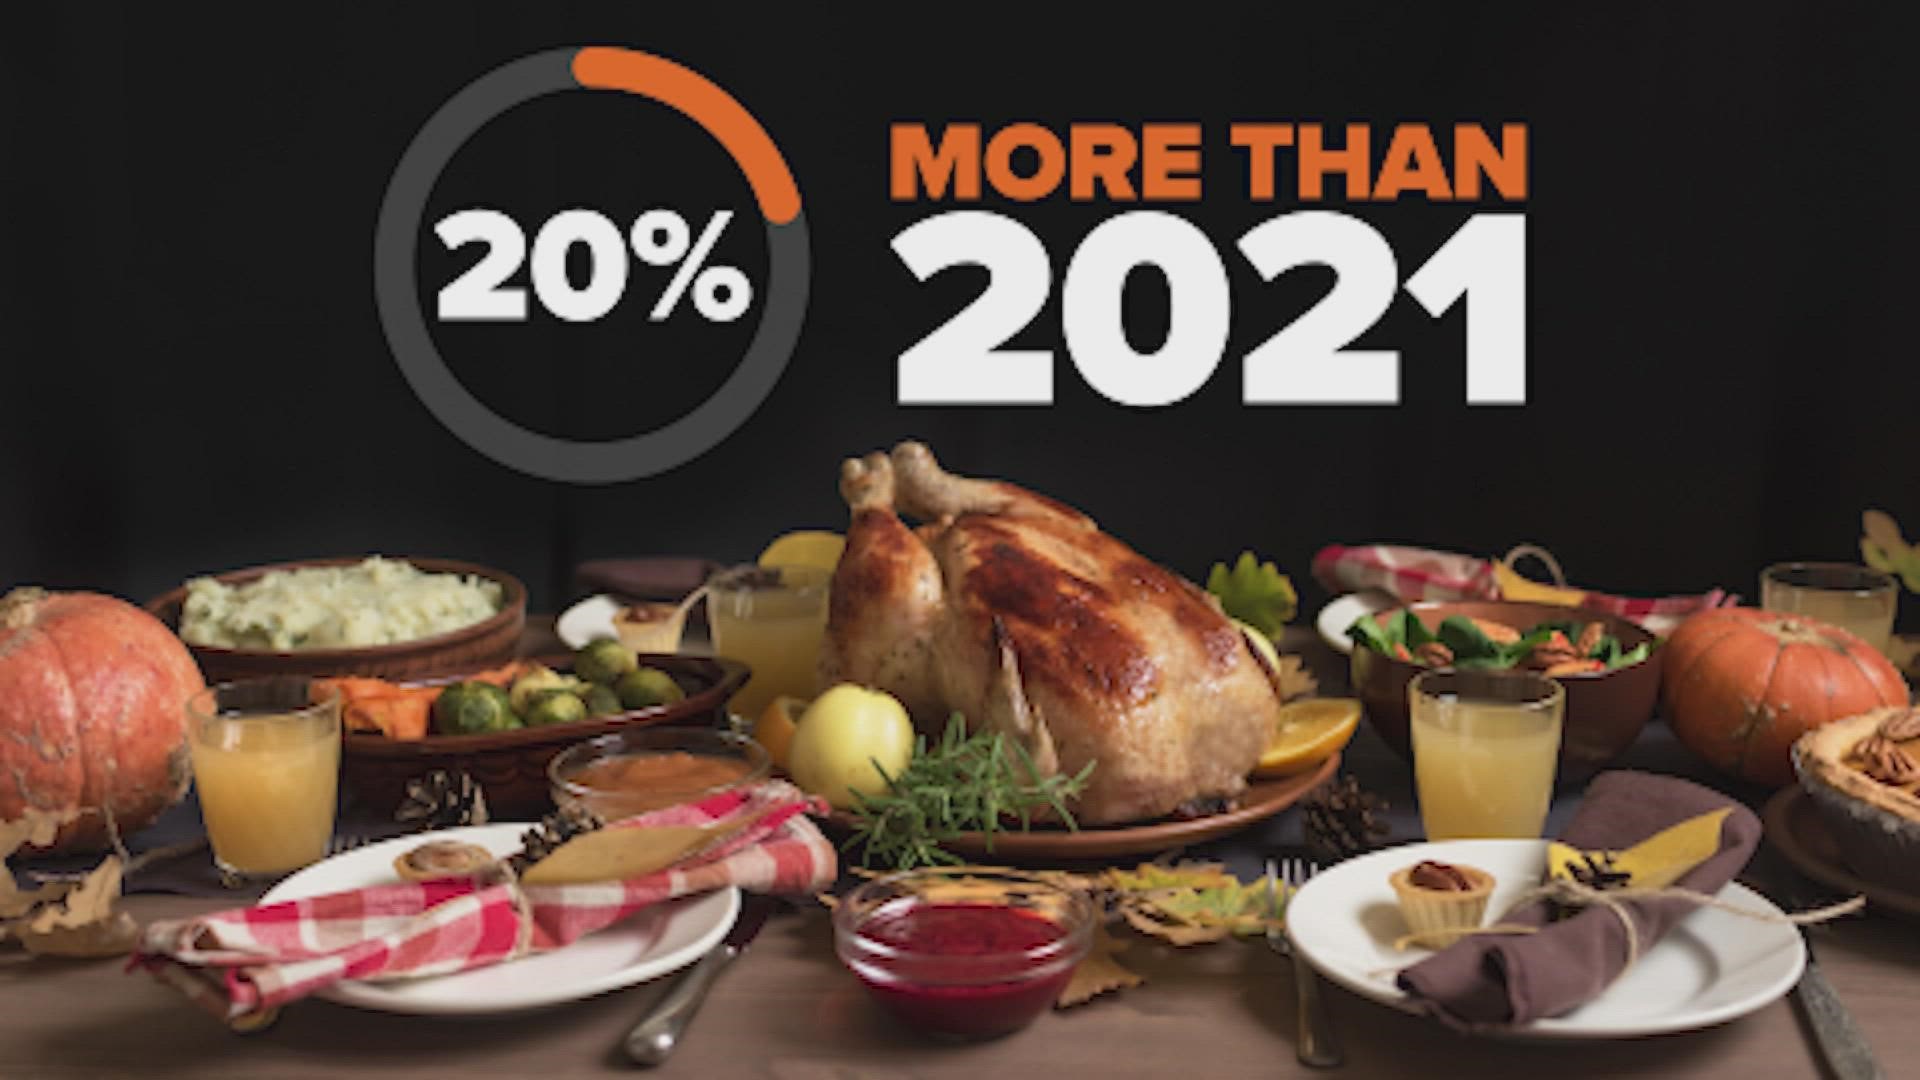 The American Farm Bureau estimates a Thanksgiving meal now costs 20% more than it did last year.